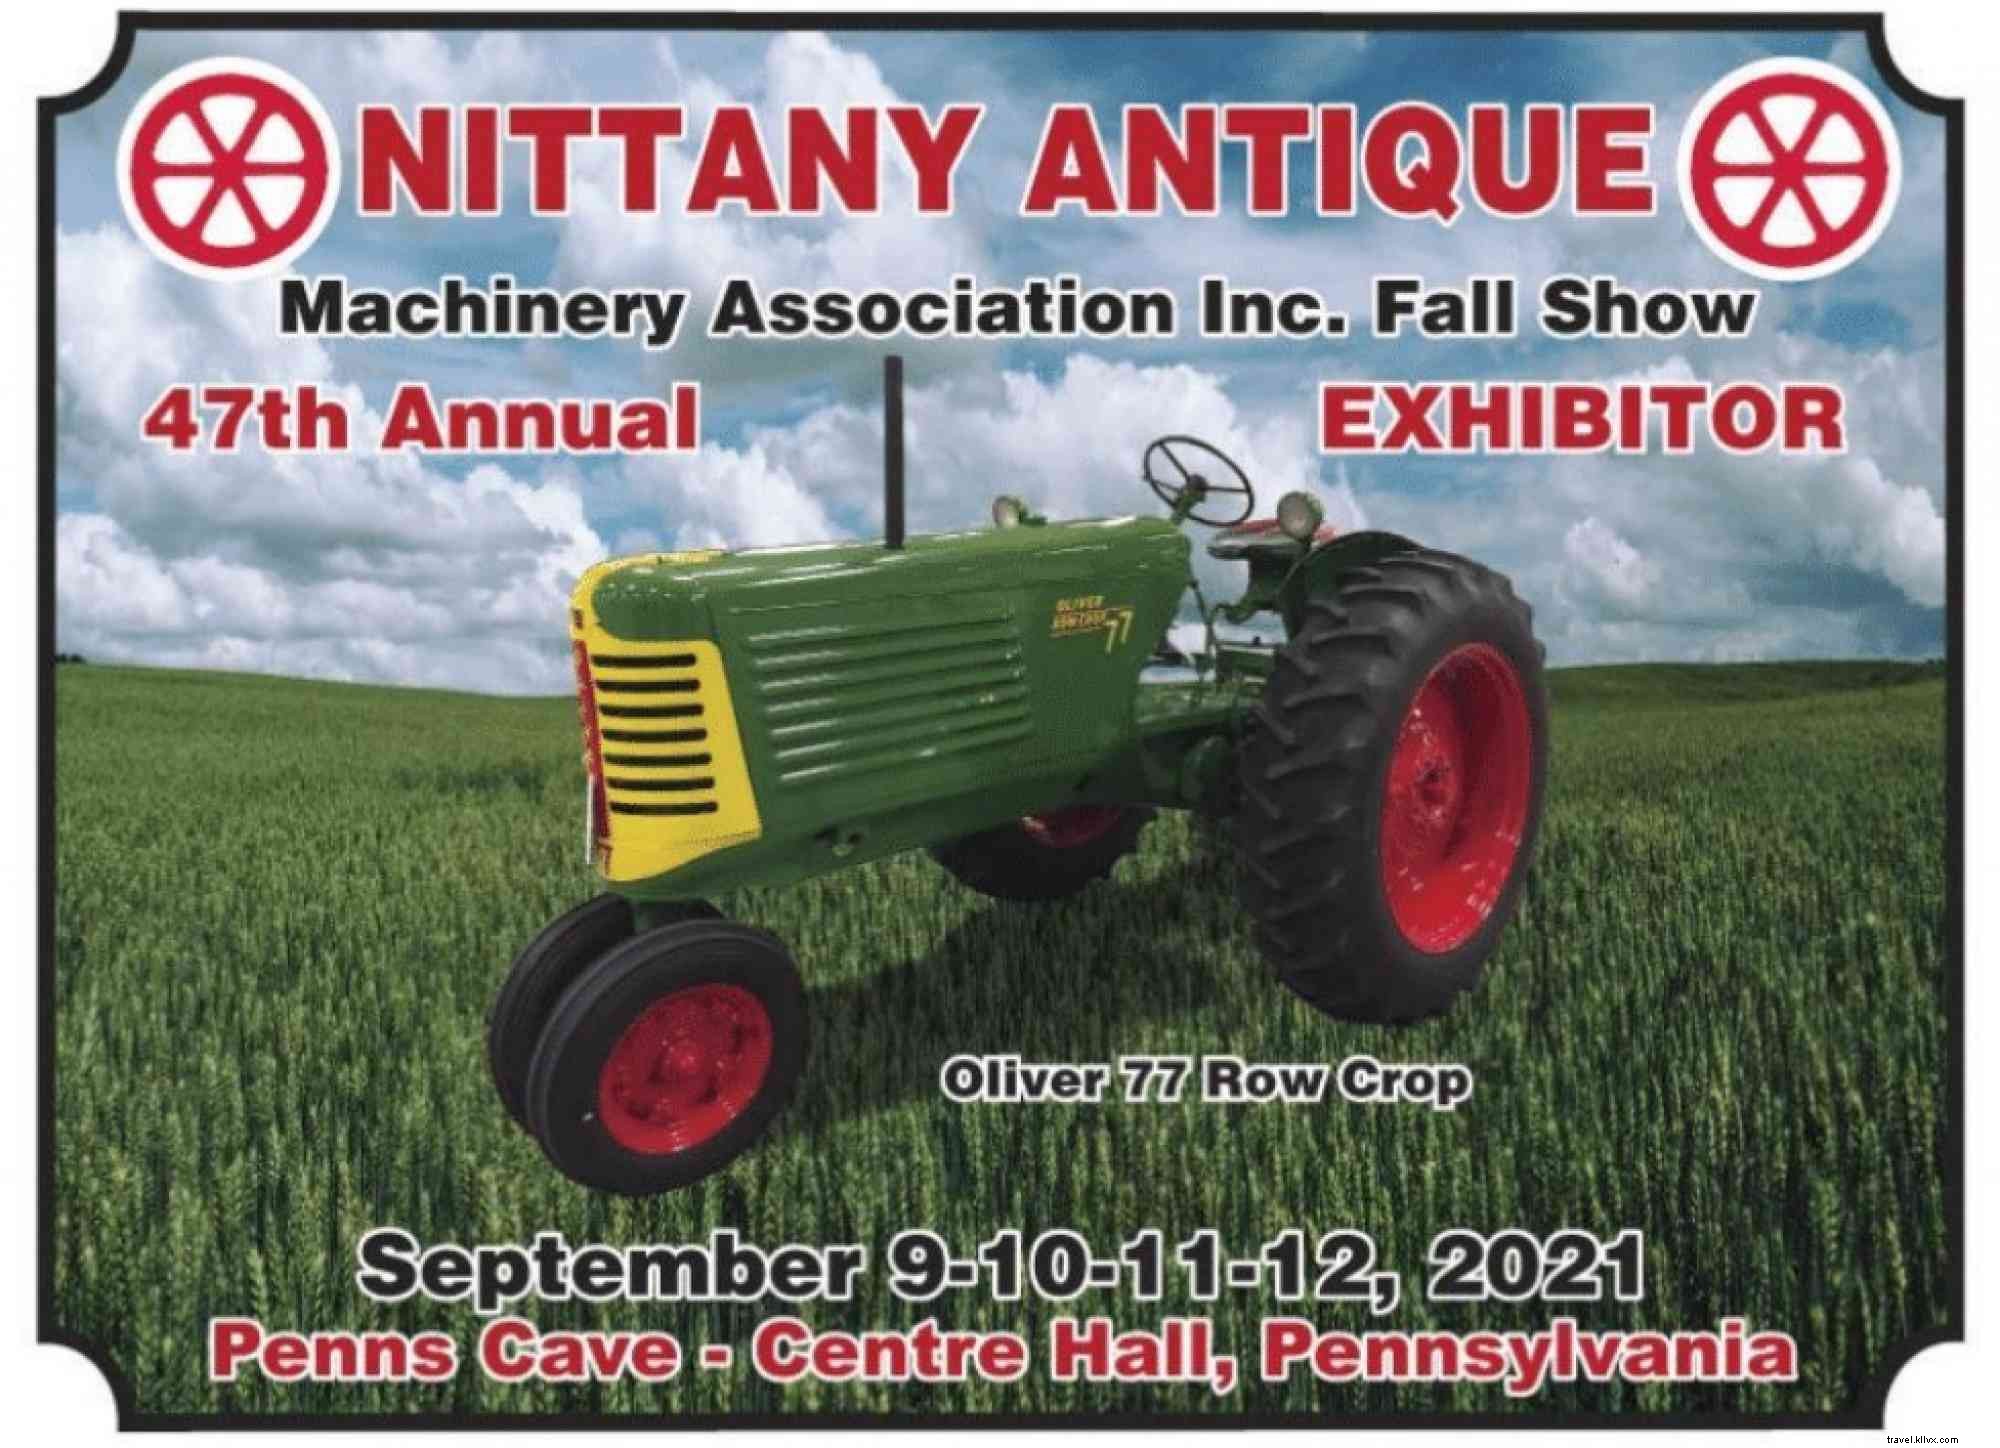 lui Nittany Antique Machinery Association 